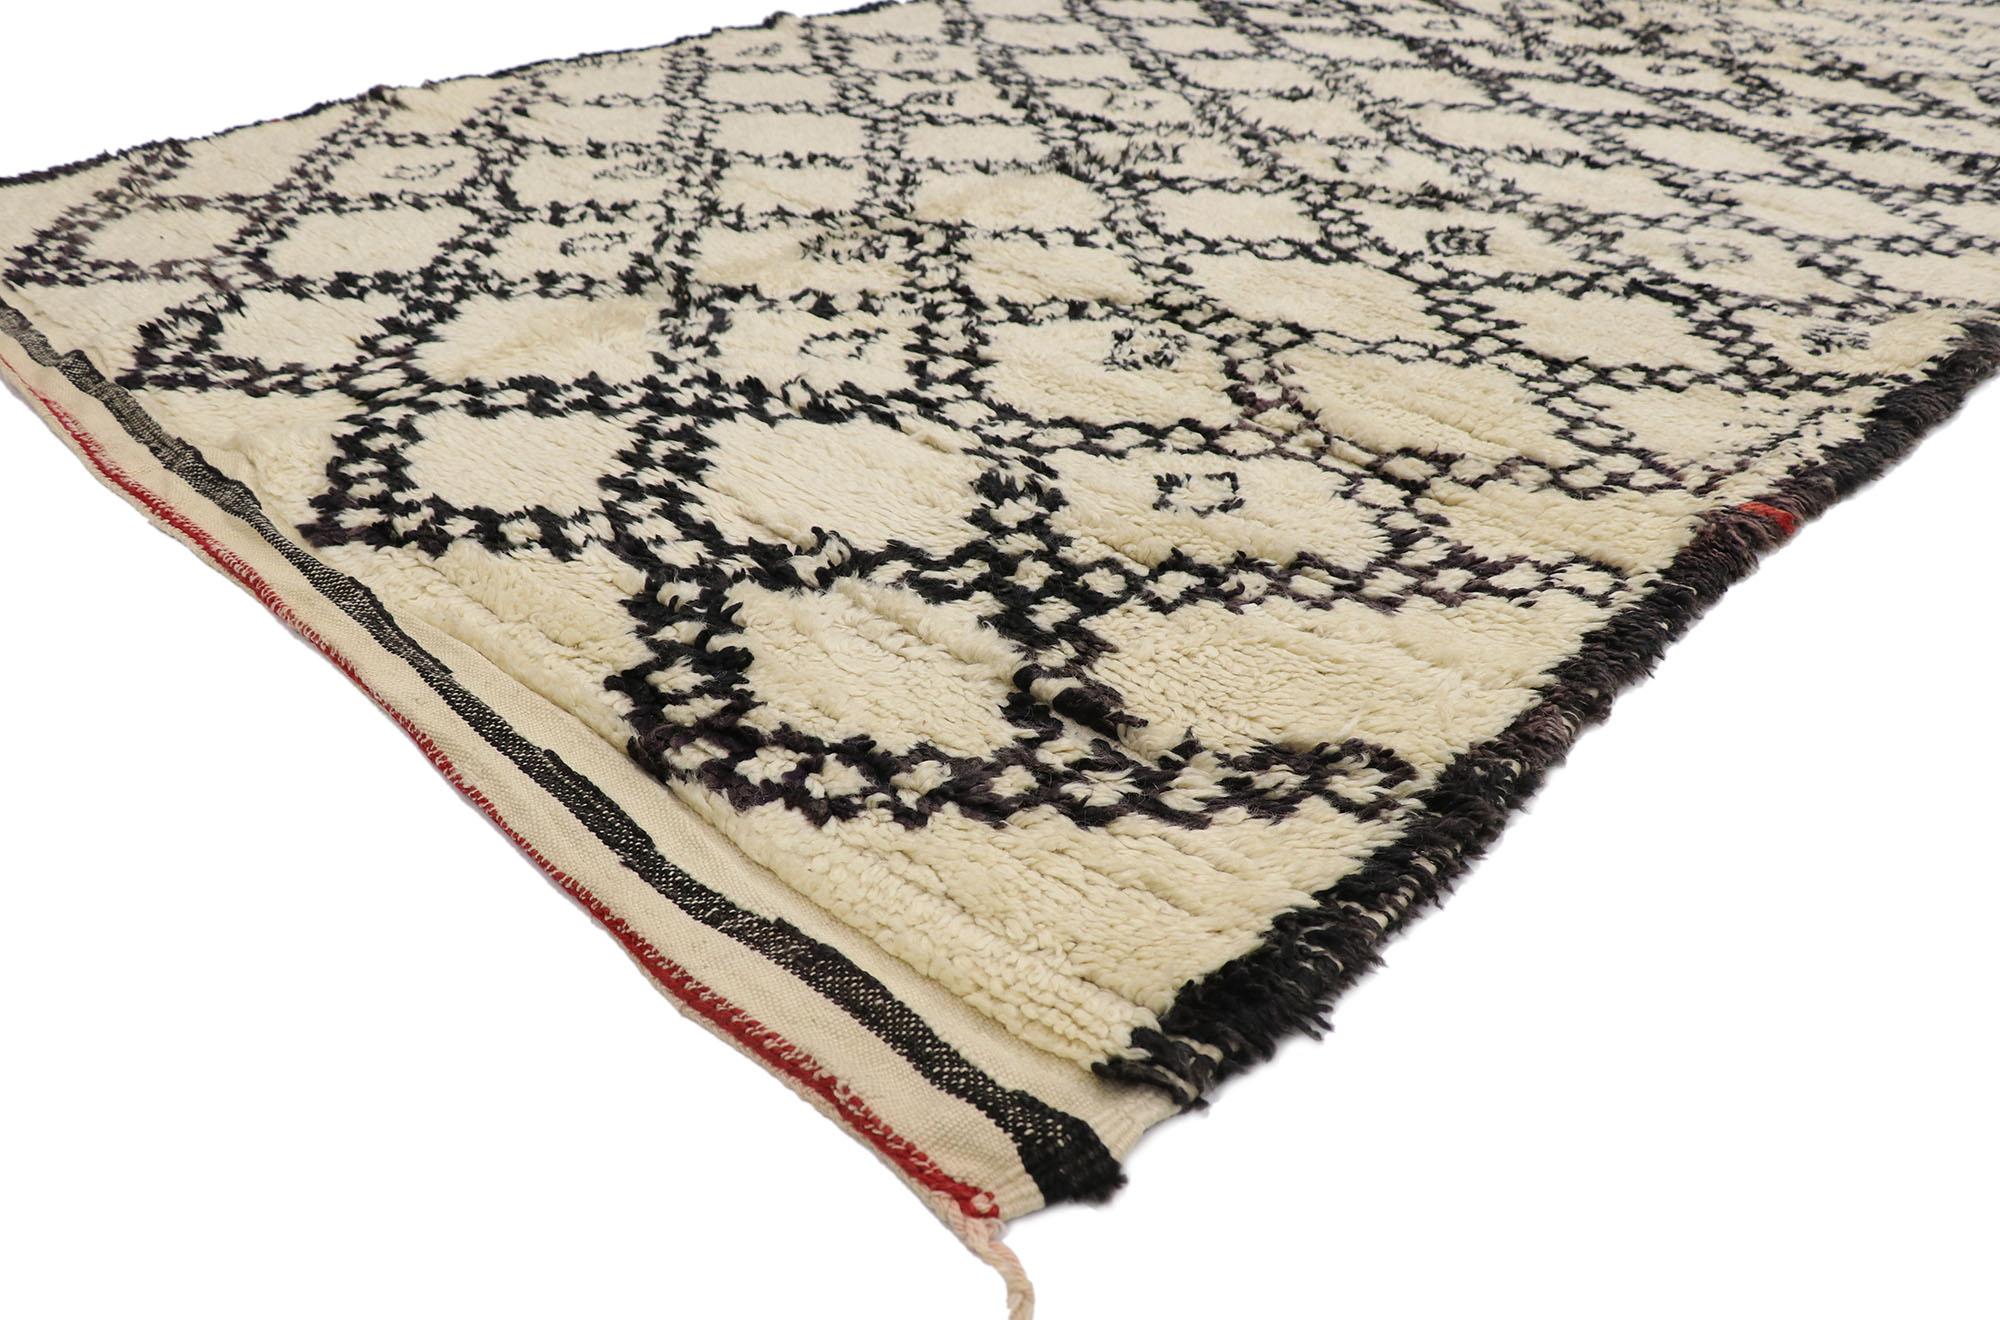 21362 Vintage Berber Beni Ourain Moroccan rug with Mid-Century Modern Style 06'02 x 11'05. With its simplicity, plush pile and Mid-Century Modern style, this hand knotted wool vintage Berber Beni Ourain Moroccan rug is a captivating vision of woven